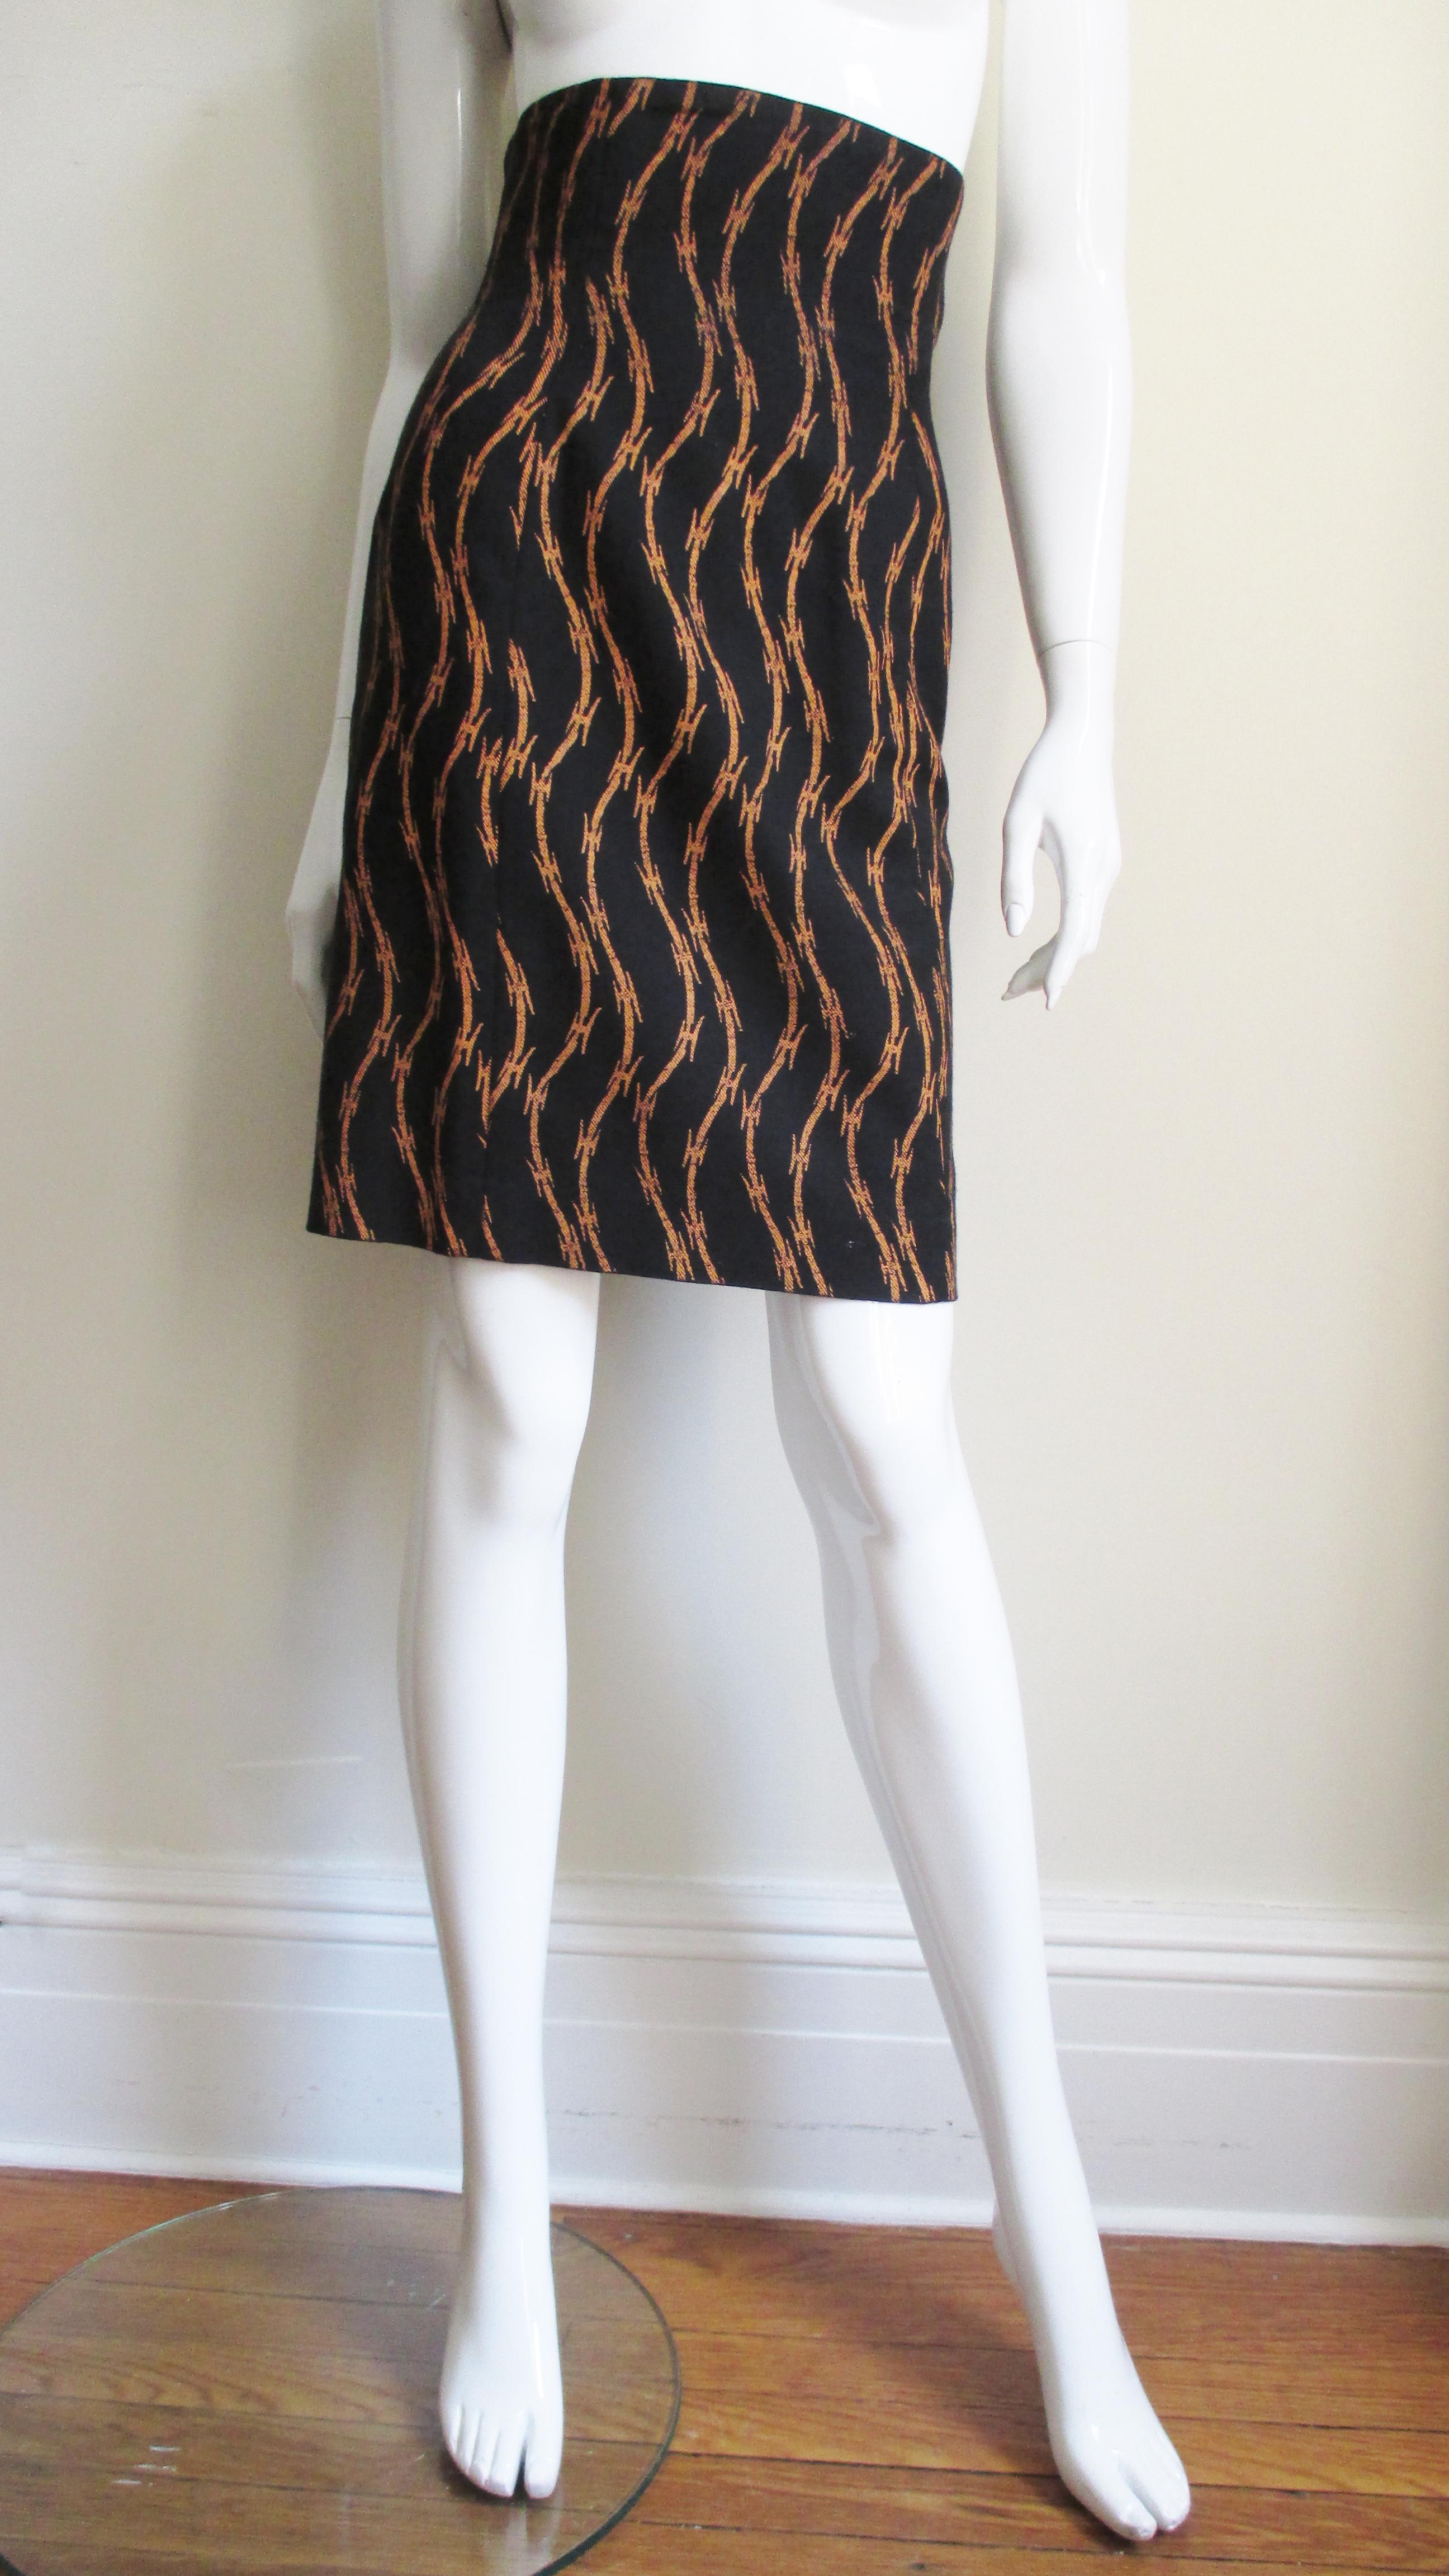 Stephen Sprouse Iconic Barb Wire Print Skirt 1980s In Good Condition For Sale In Water Mill, NY